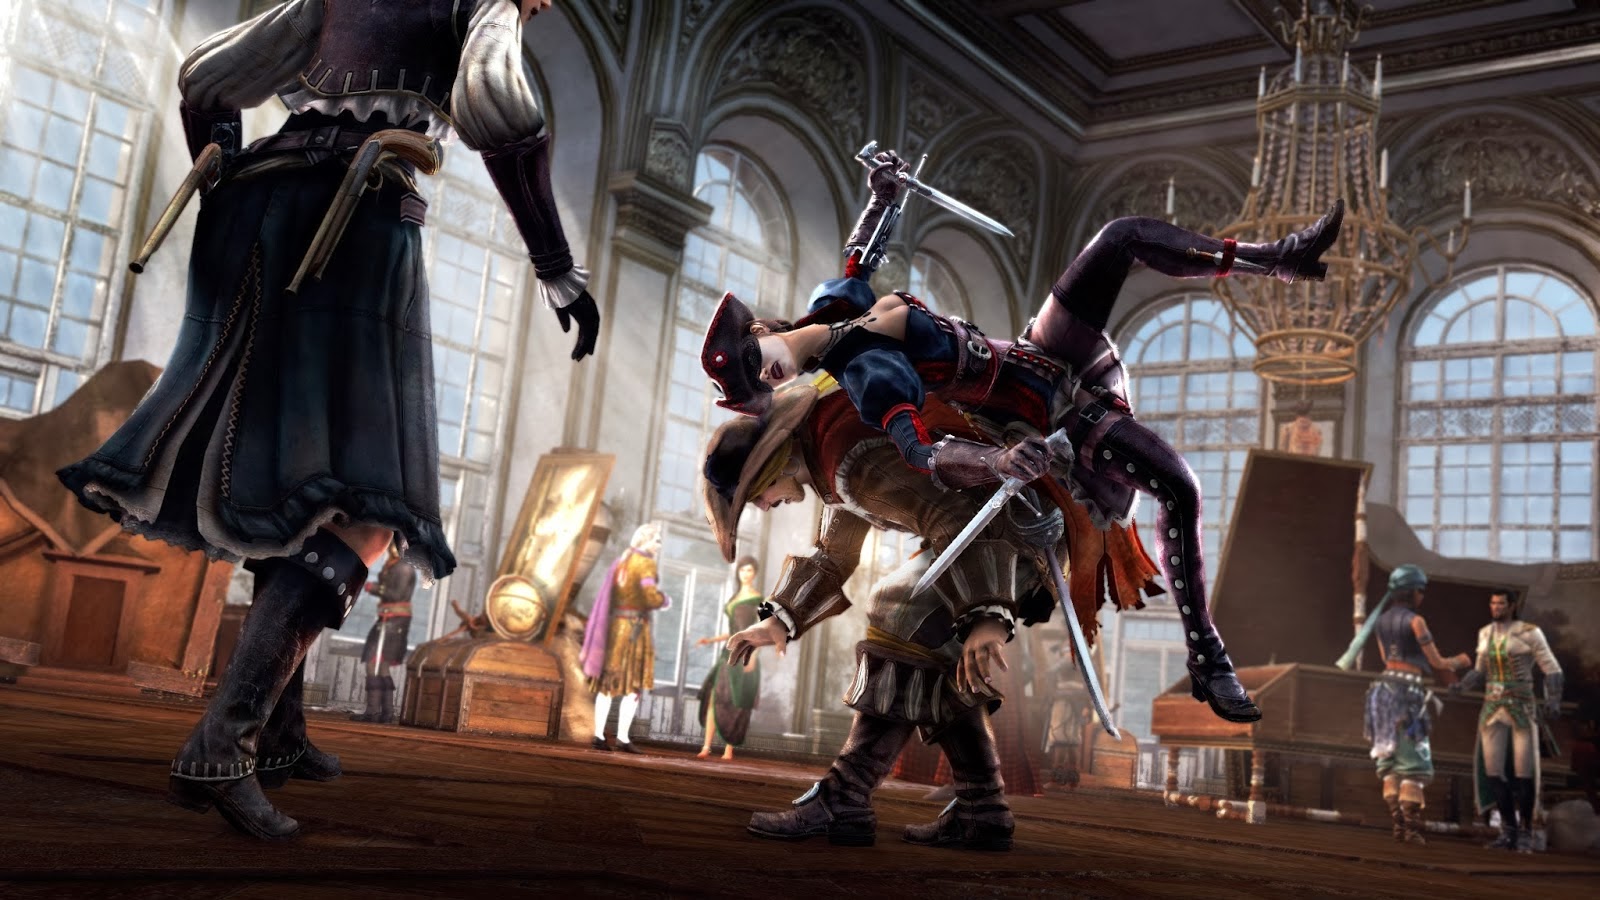 Free Download PC Games Full Crack: Assassin's Creed IV 